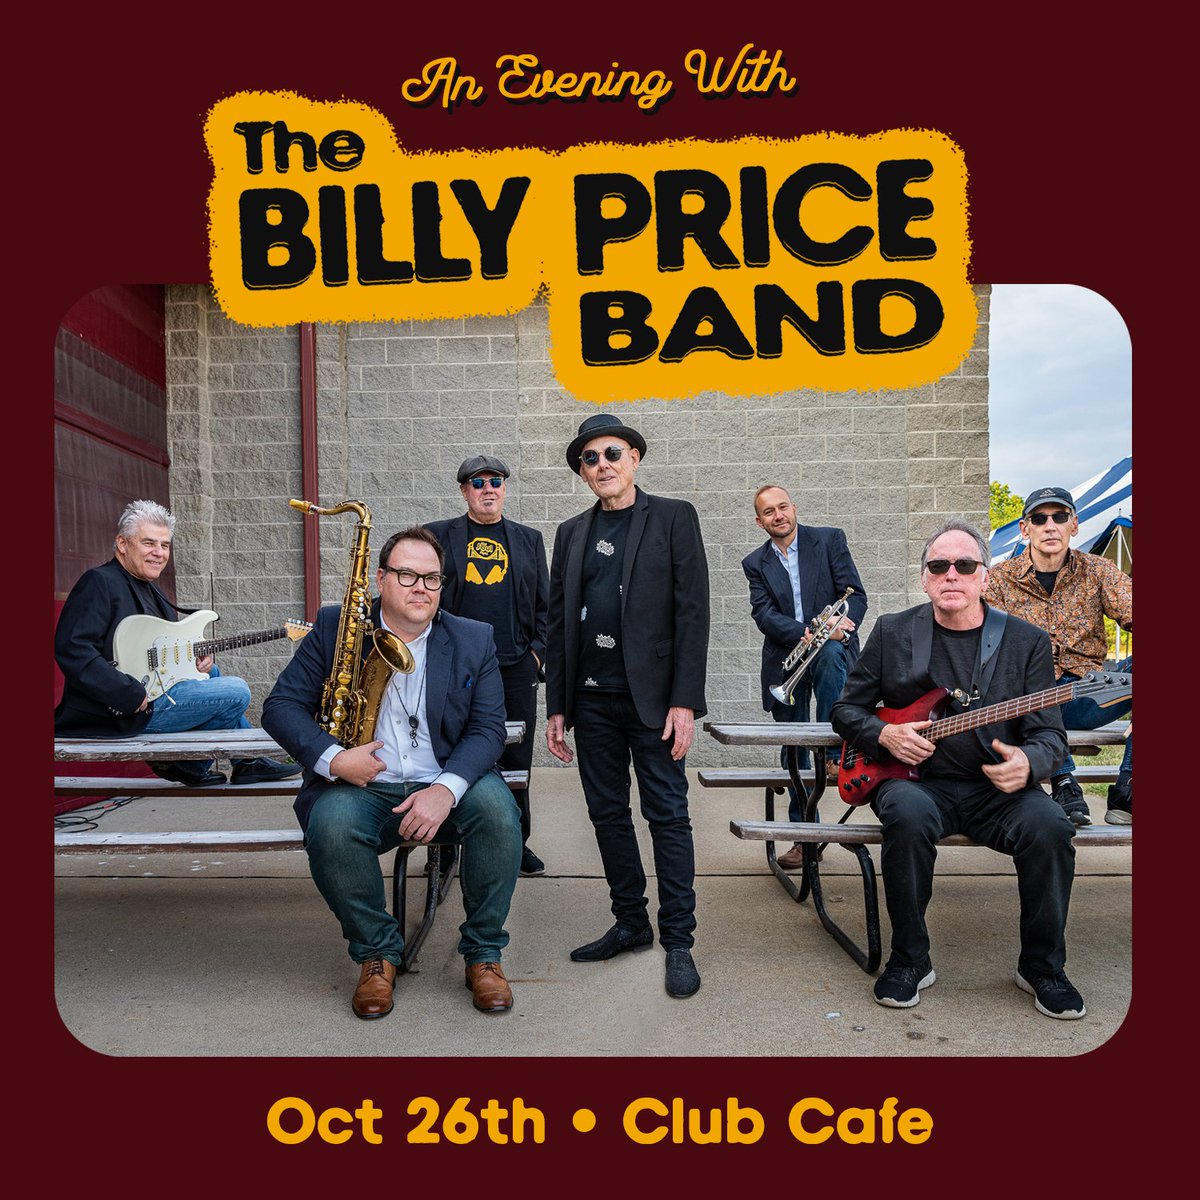 📣🗓 NEW SHOW 🗓📣

@ClubCafeLive | 10/26 | An Evening with The @BillyPricePgh band! 

🎟 On Sale 05/07 at 10am via: hive.co/l/1026billypri… 

#opusonepgh #pittsburgh #billyprice #billypriceband #clubcafe #clubcafelive #local #blues